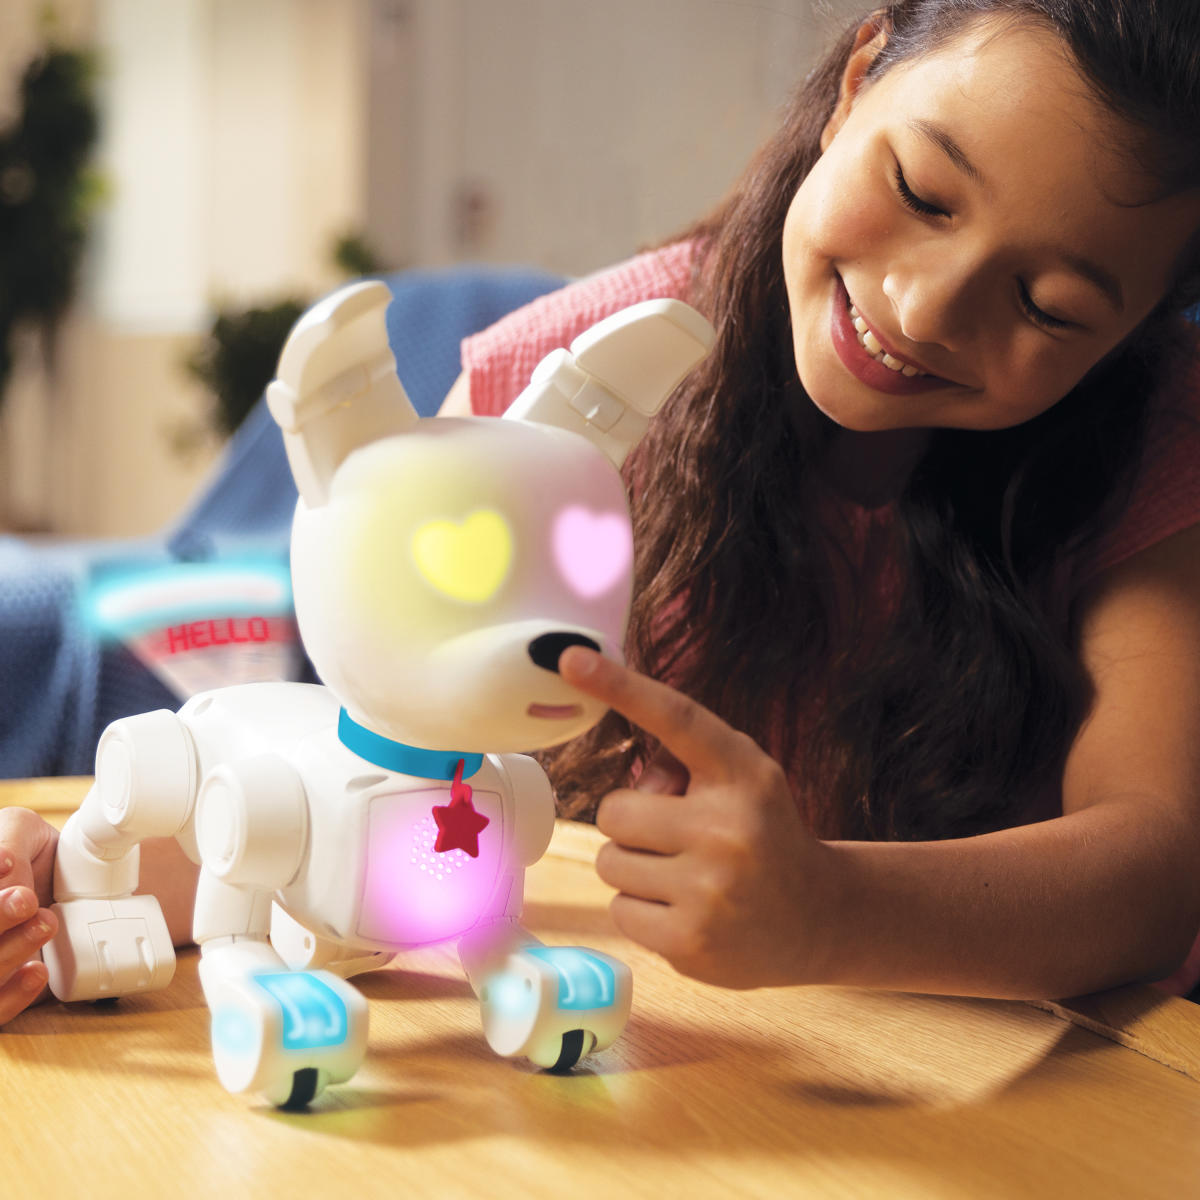 e5508720 8c47 11ed 9be7 5acd6359494a The Top Holiday Gift This Year Is A Robot Pet